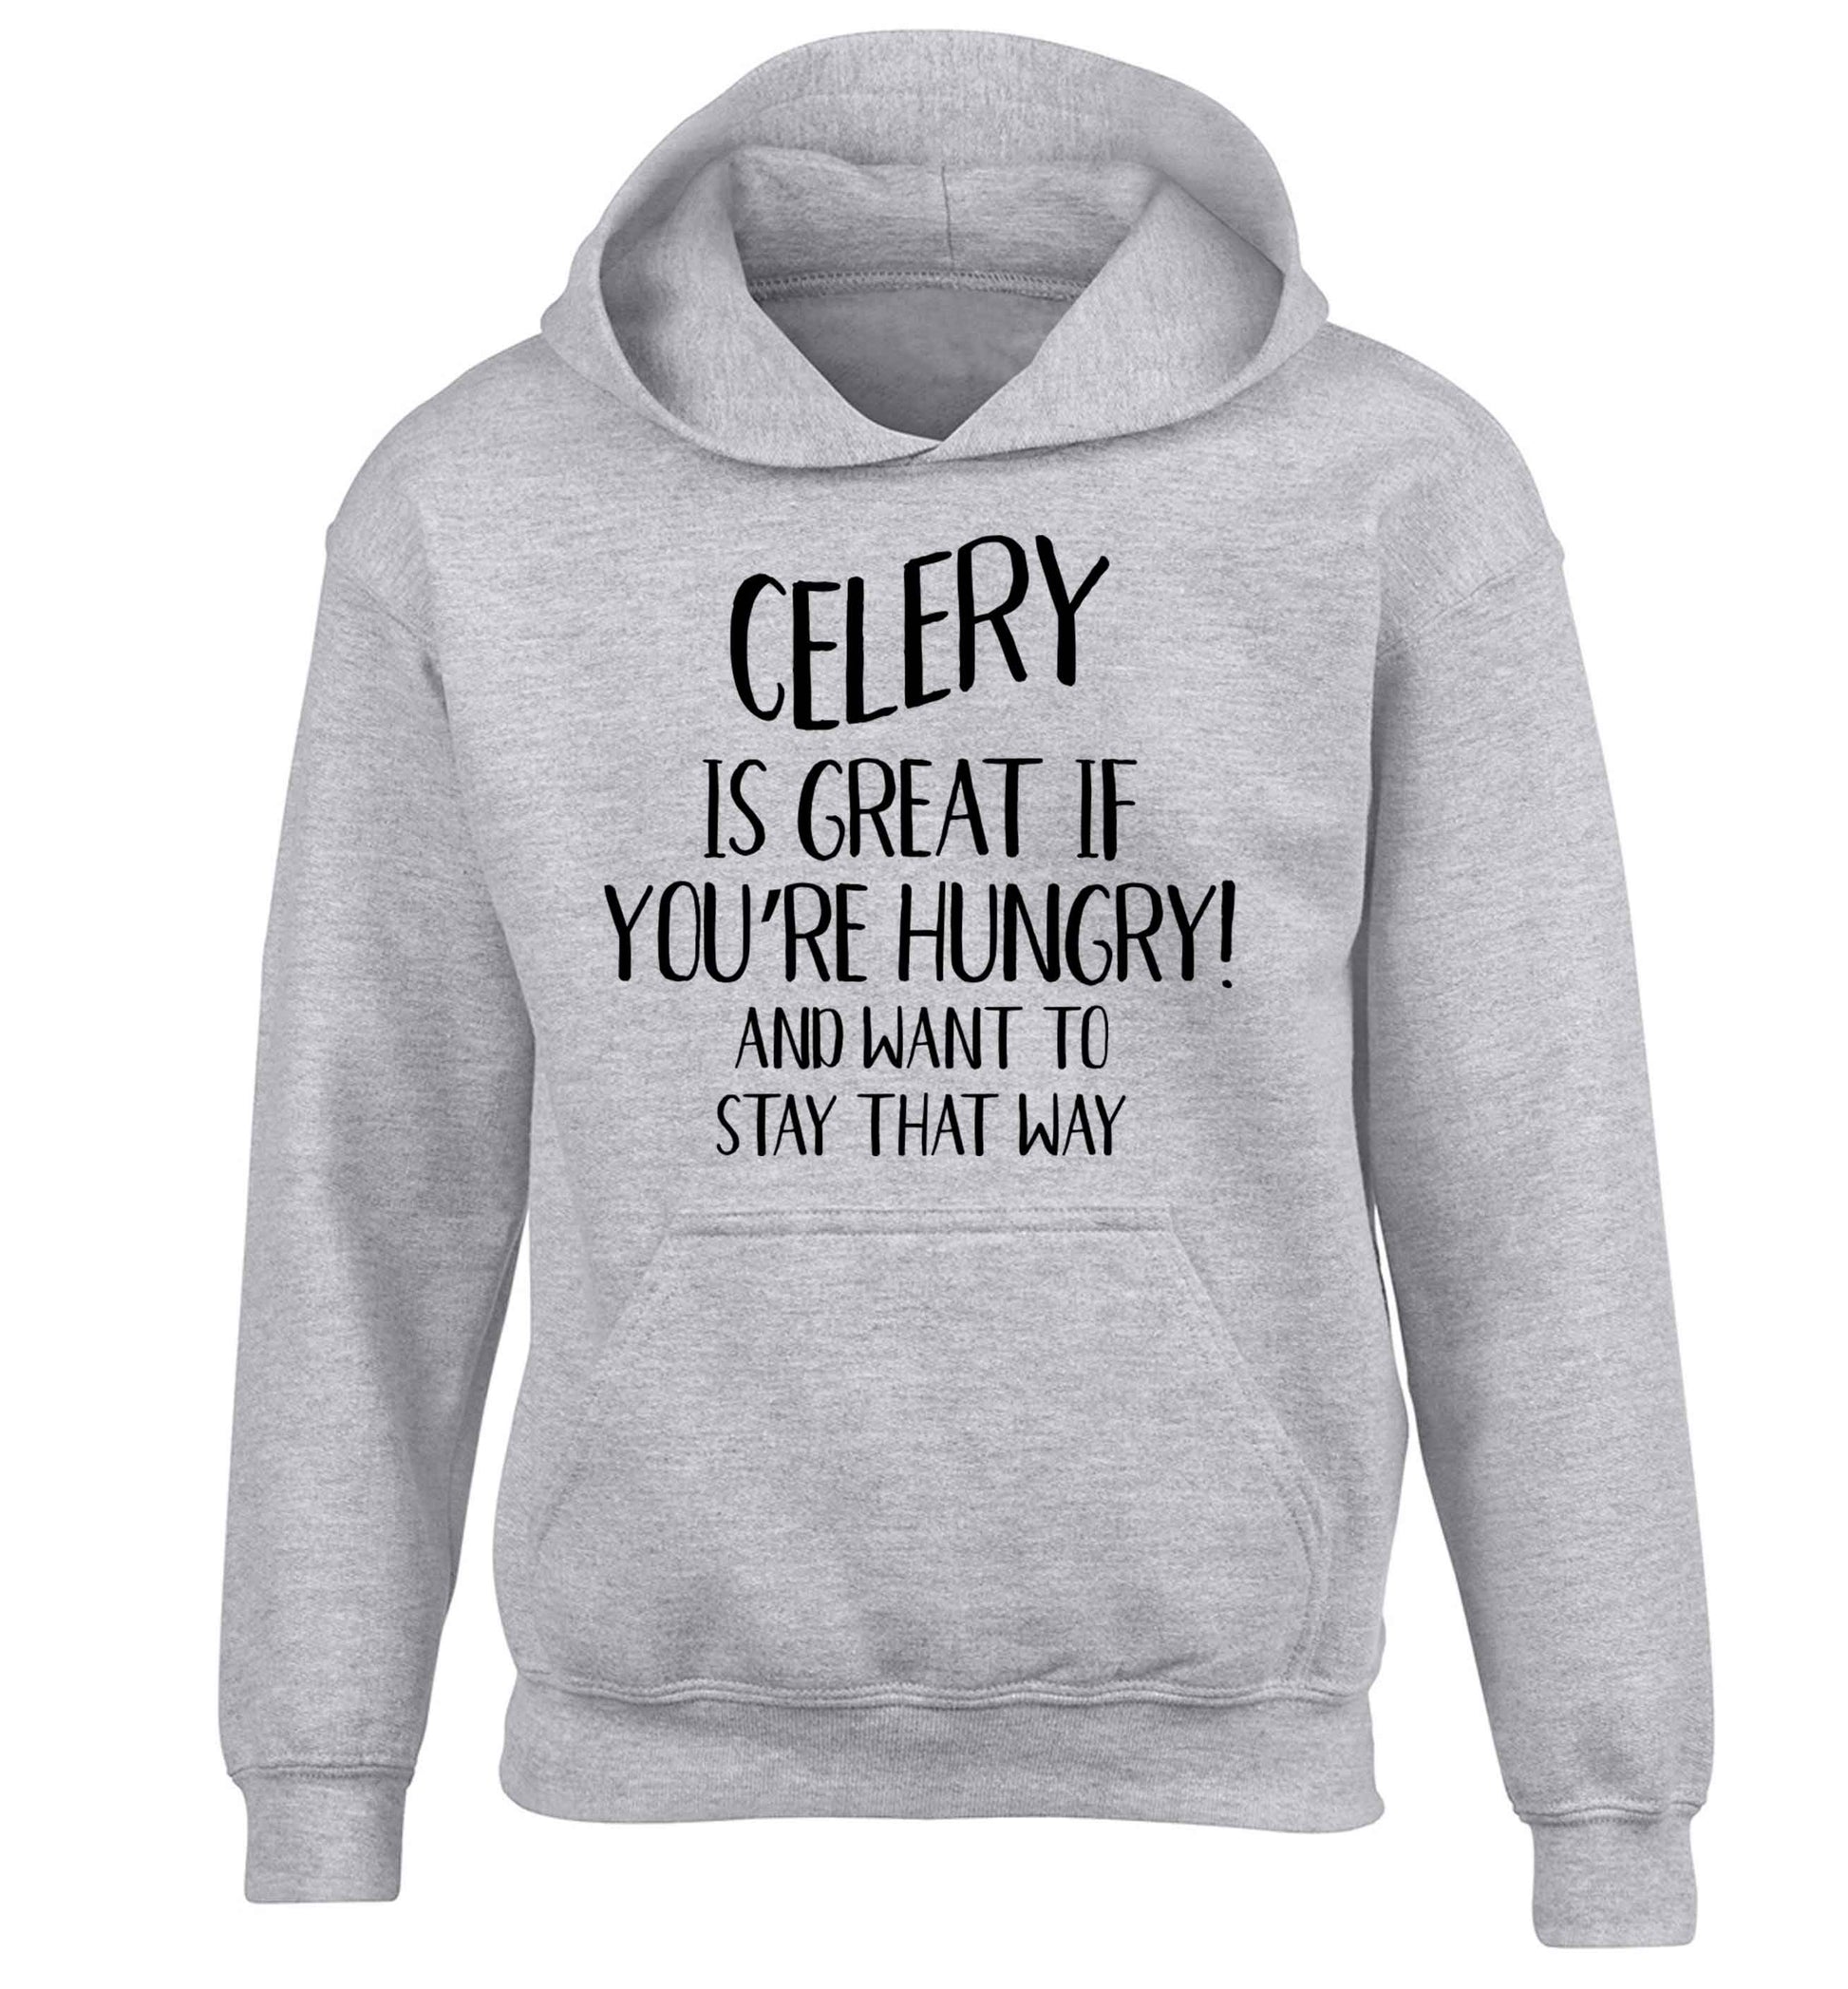 Cellery is great when you're hungry and want to stay that way children's grey hoodie 12-13 Years